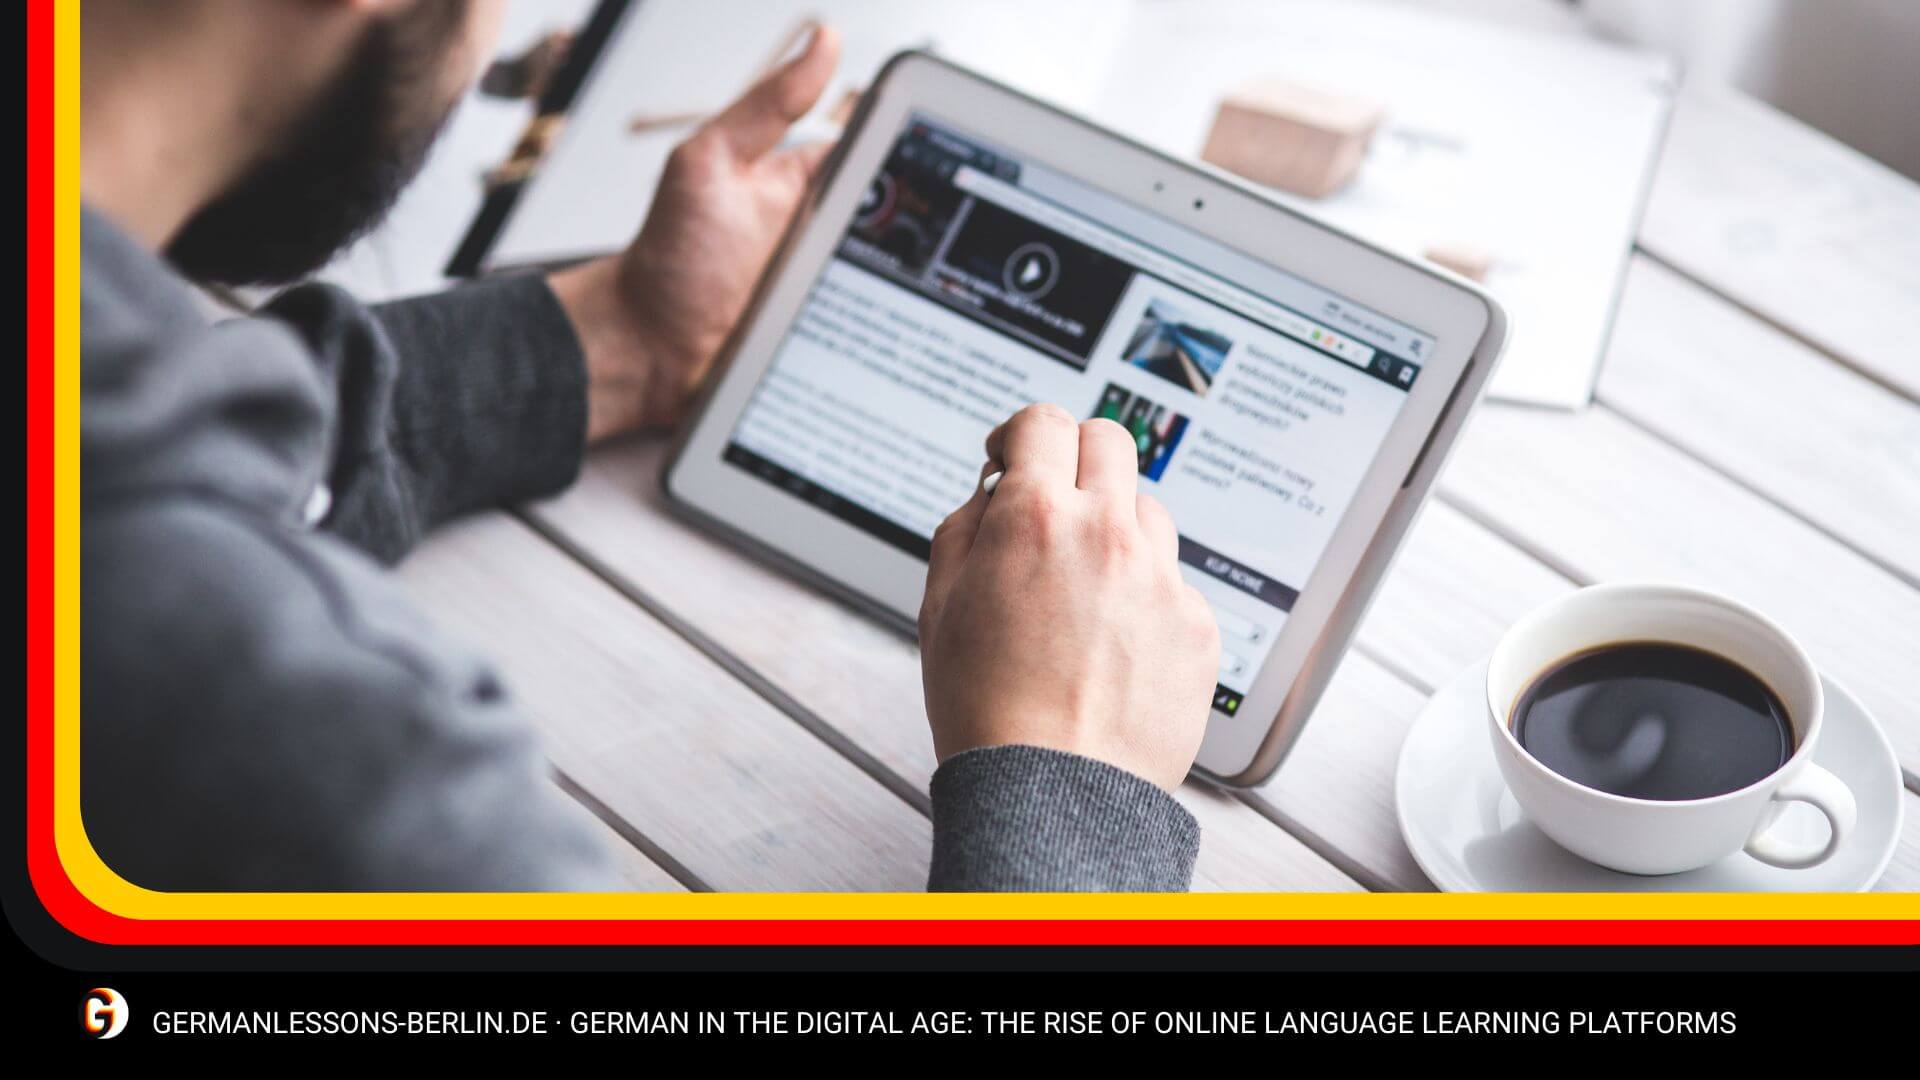 German in the Digital Age: The Rise of Online Language Learning Platforms